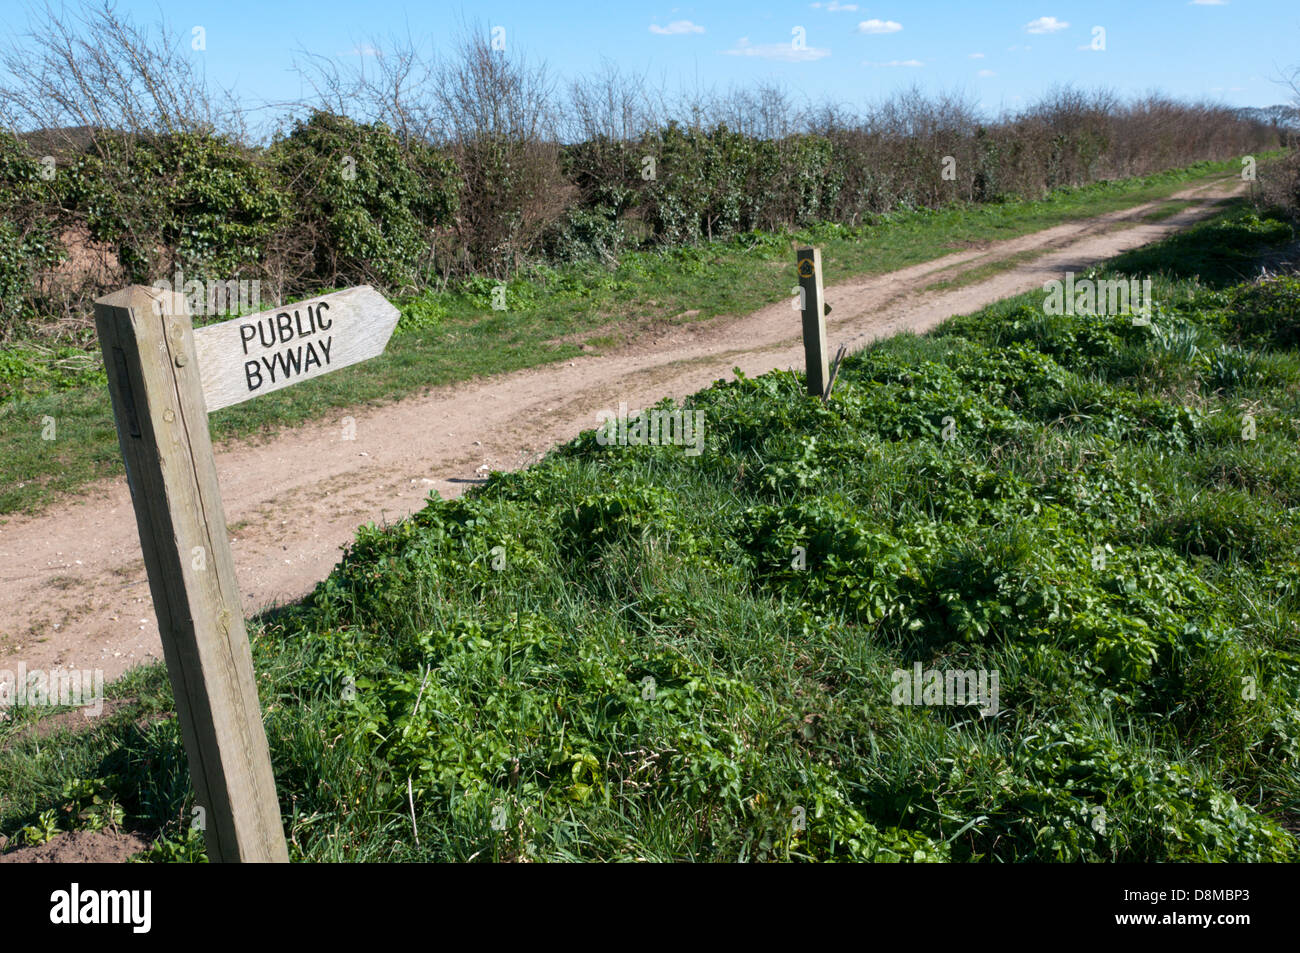 A public byway sign. Stock Photo